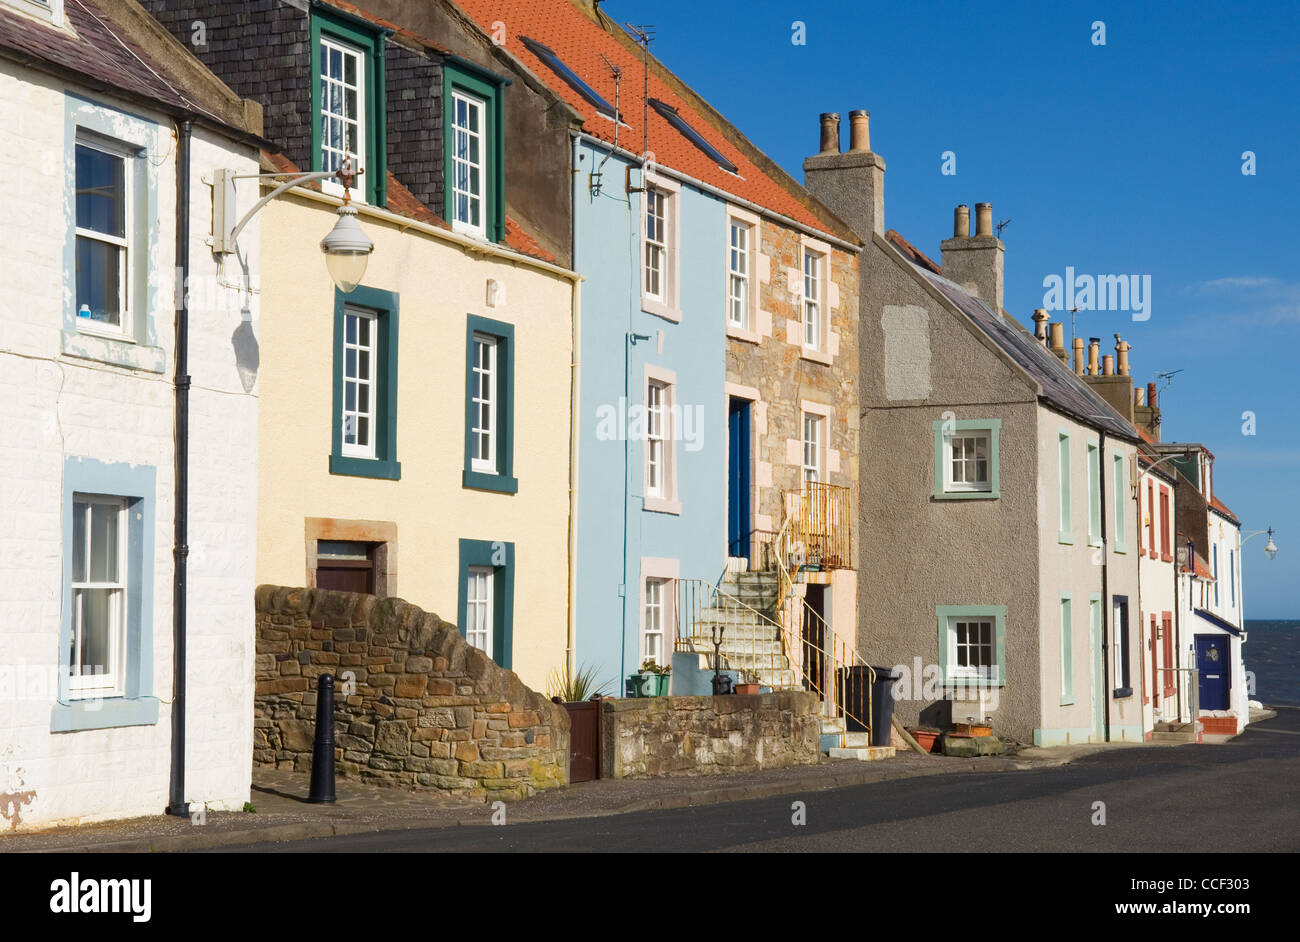 Colourful cottages in St. Monans, Fife, Scotland. Stock Photo